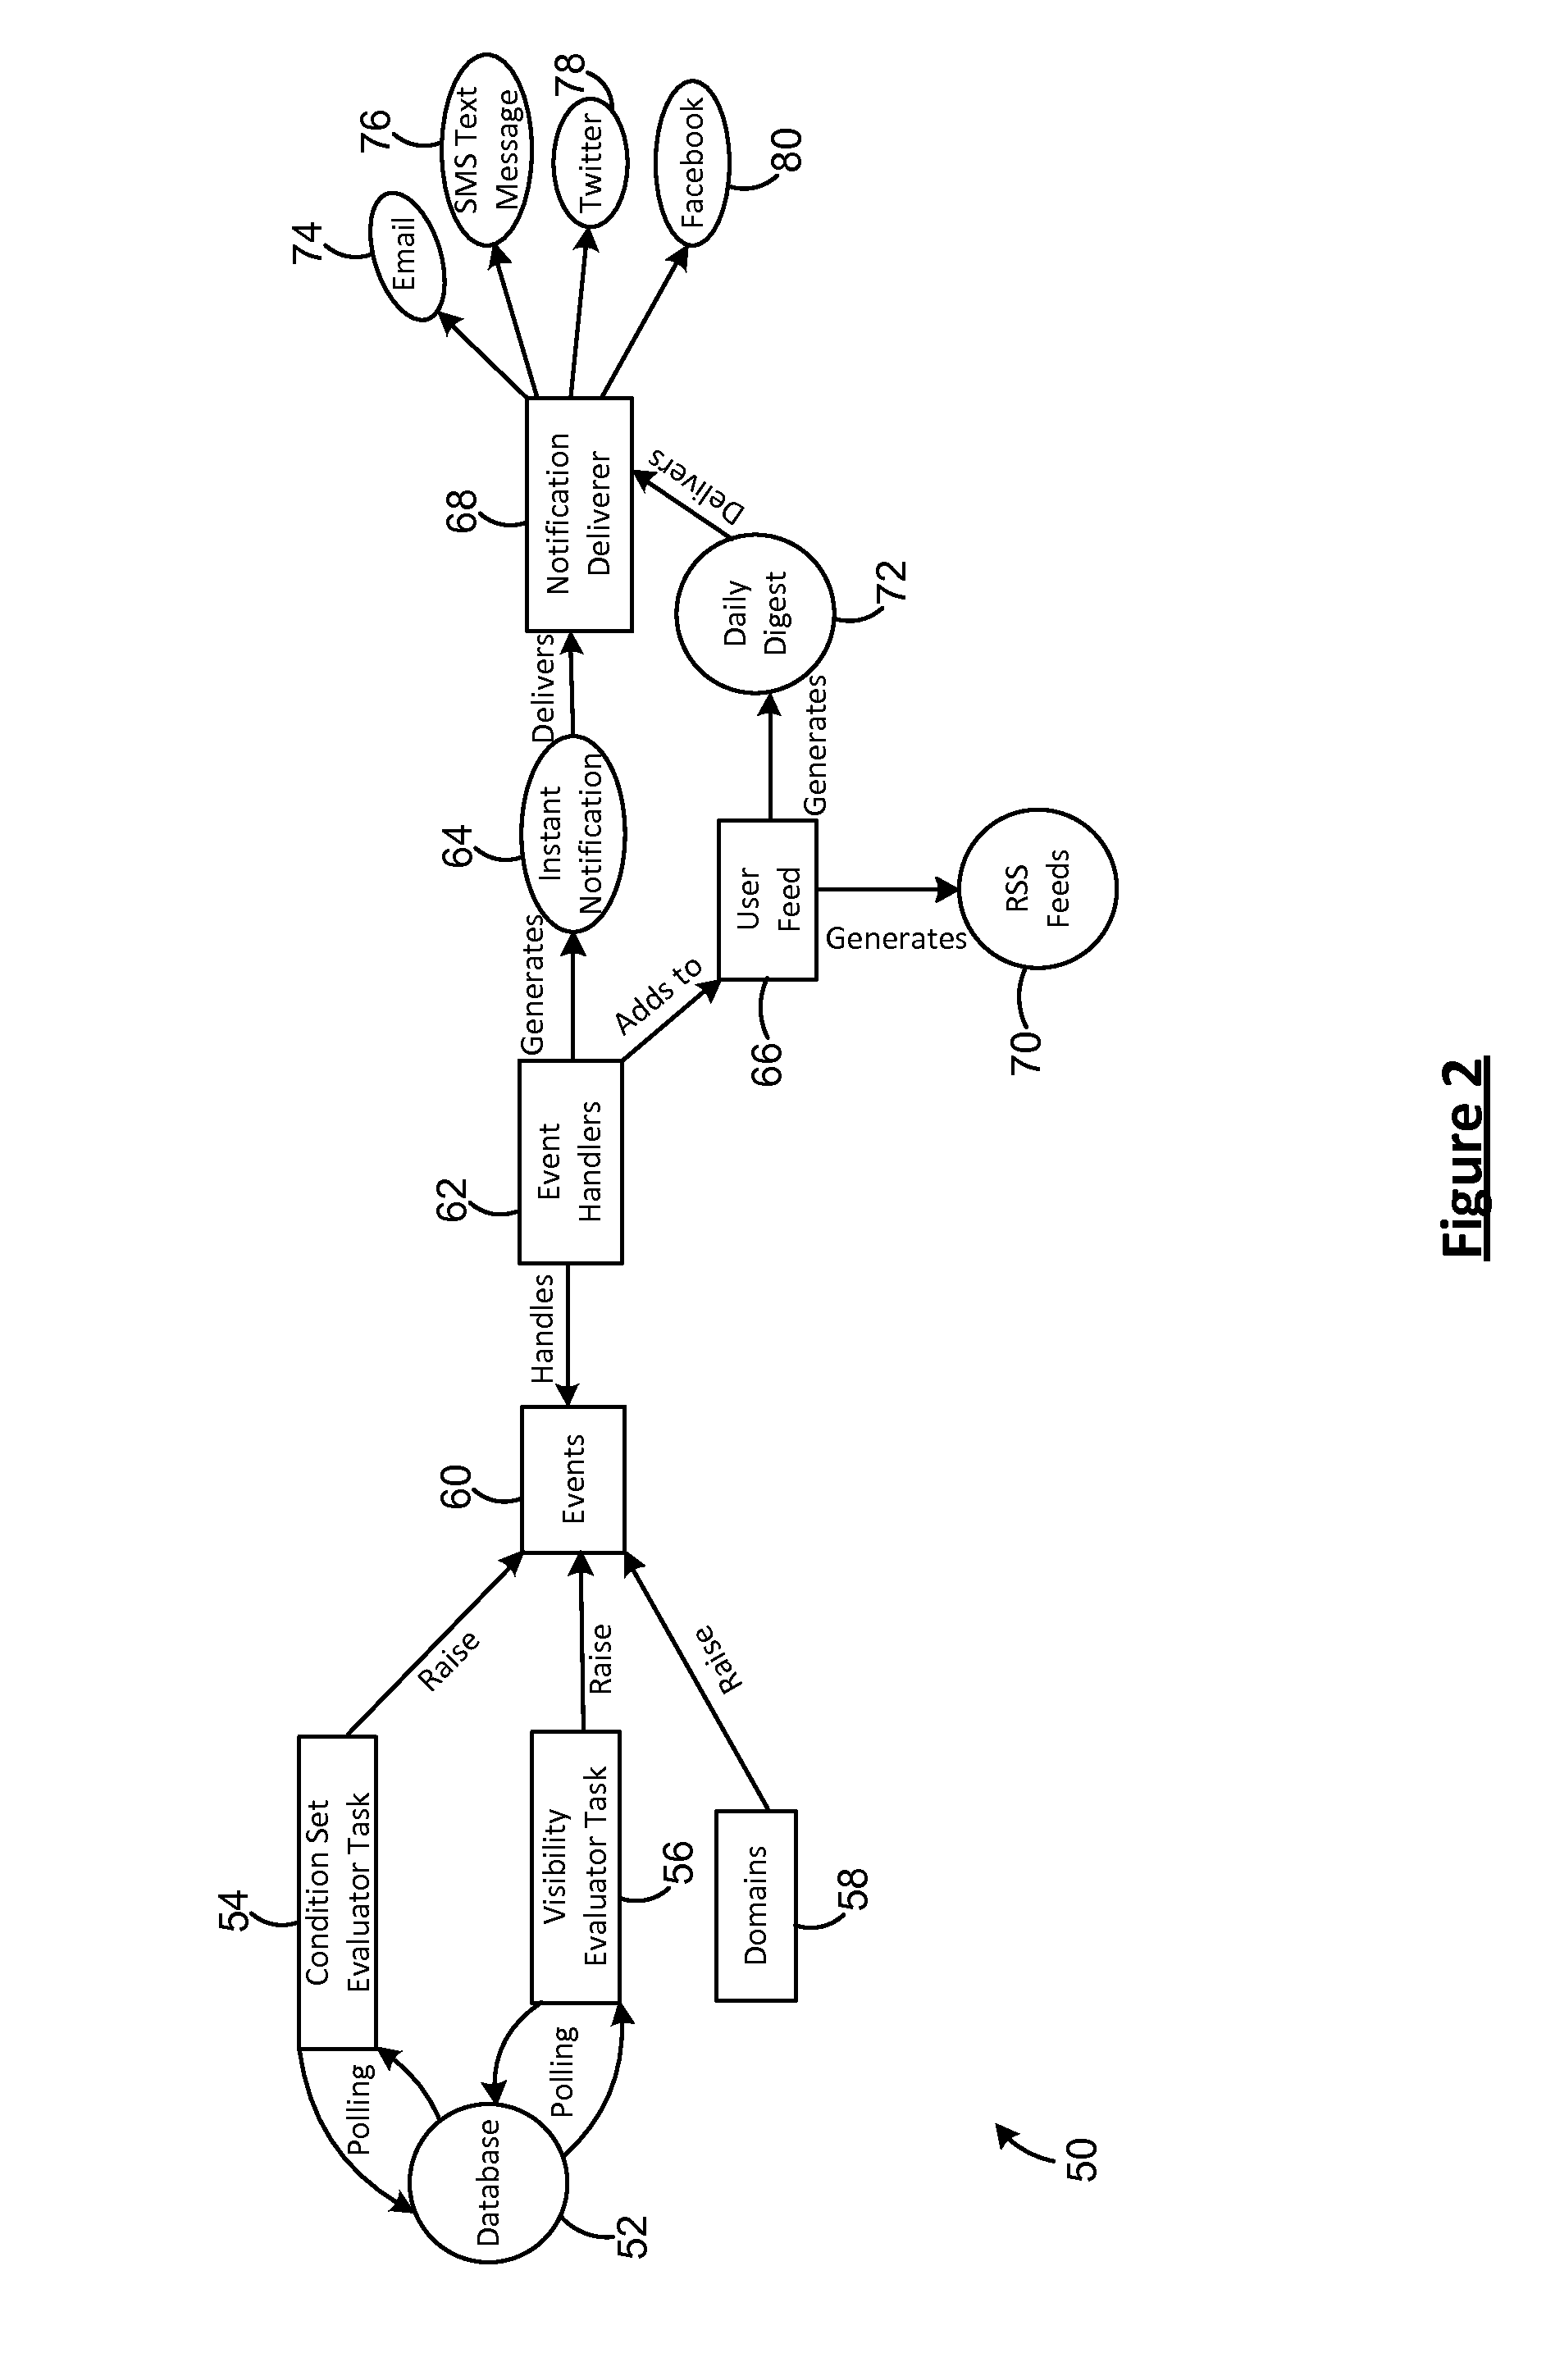 System and method for gating notifications